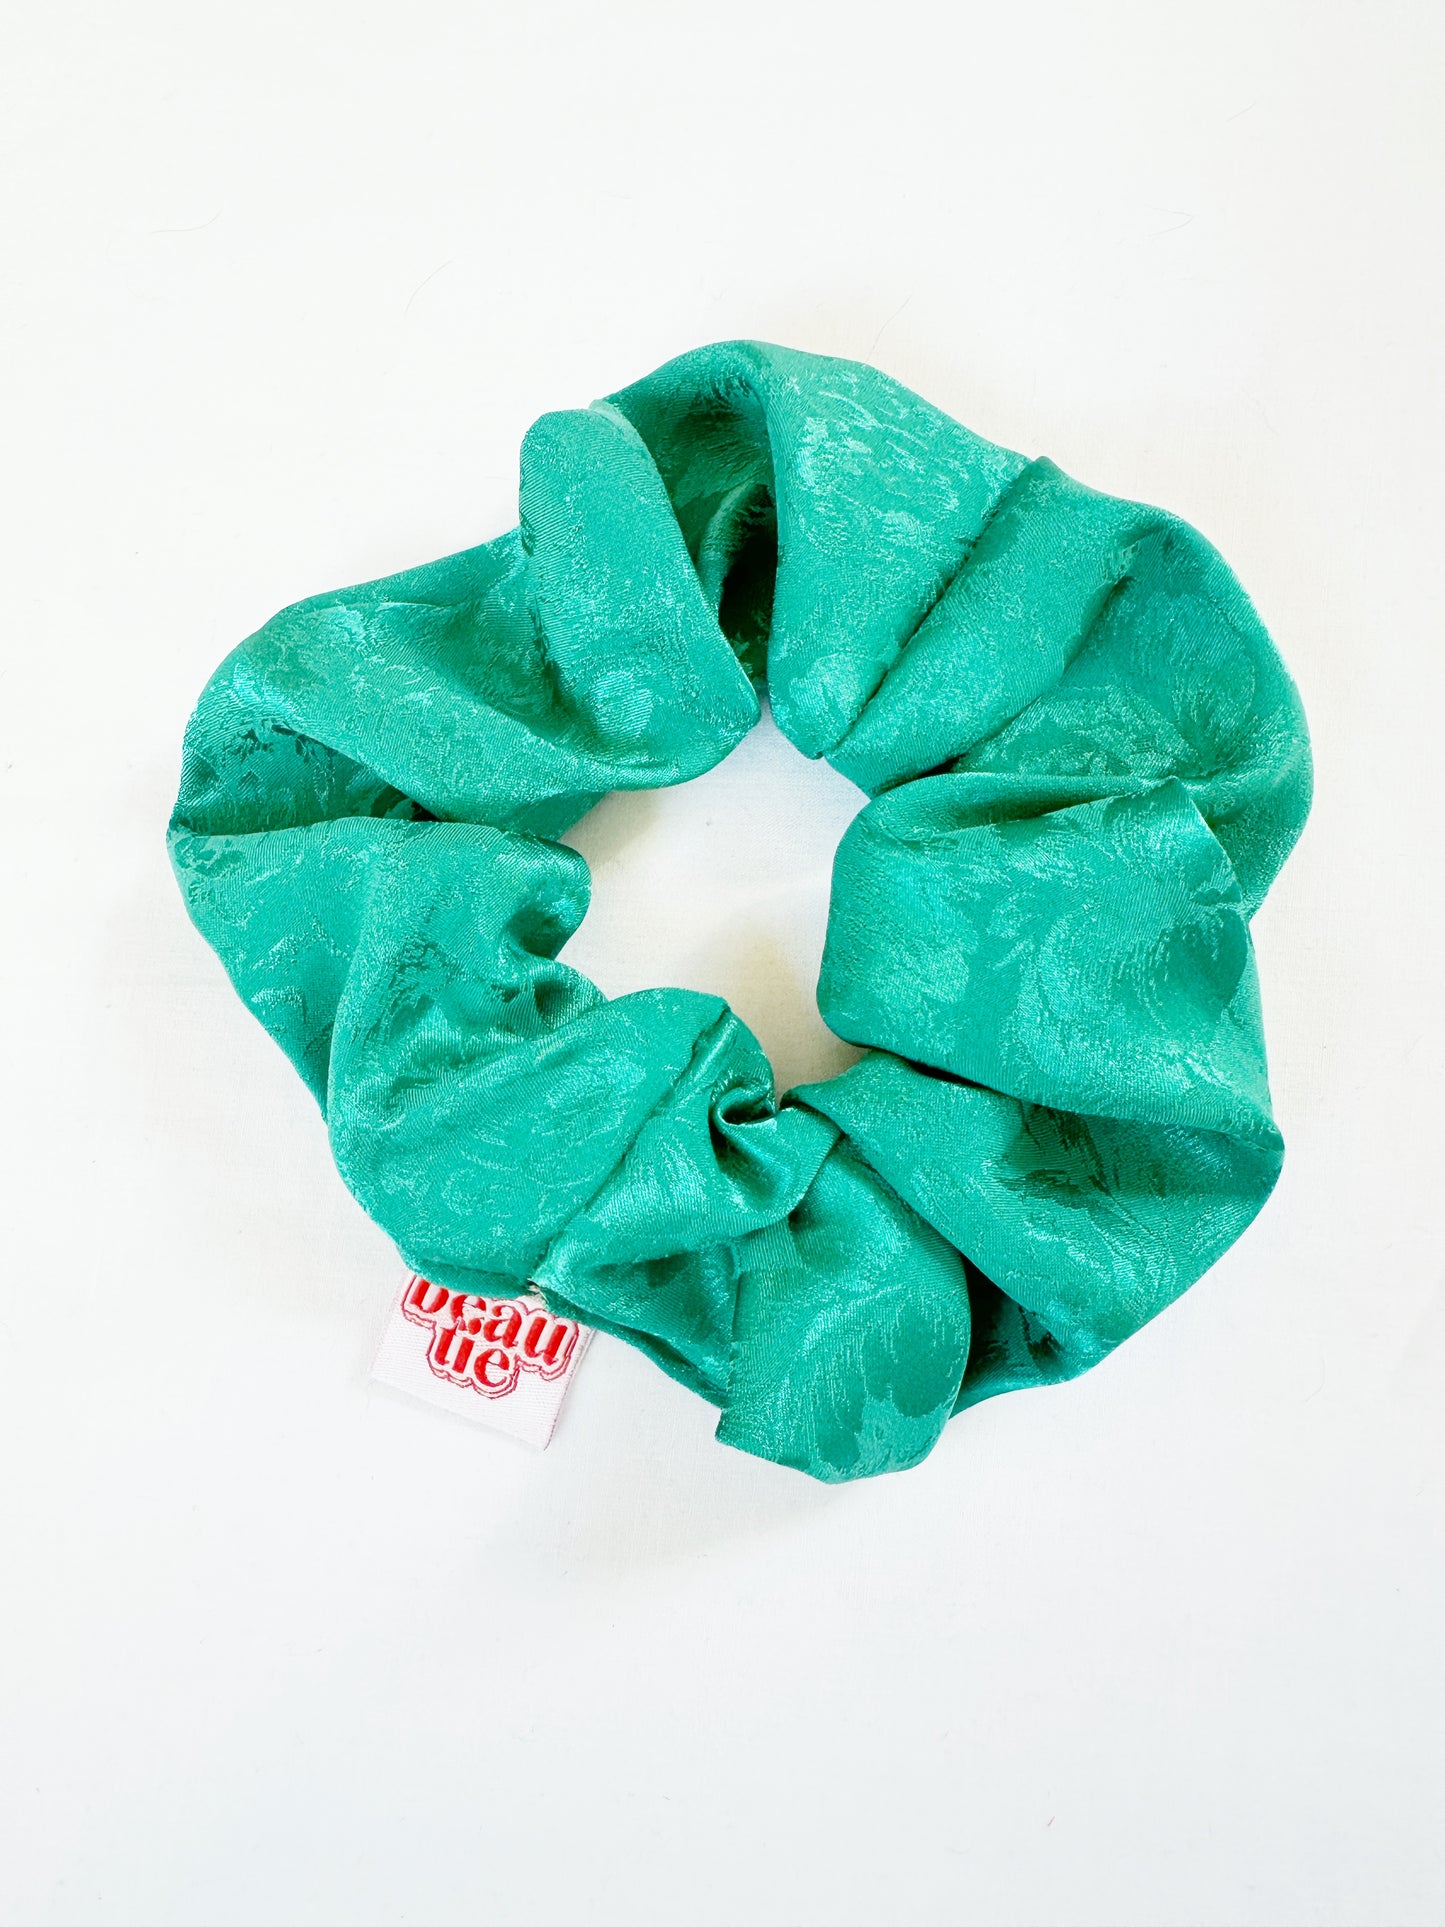 OG scrunchie in turquoise silky floral